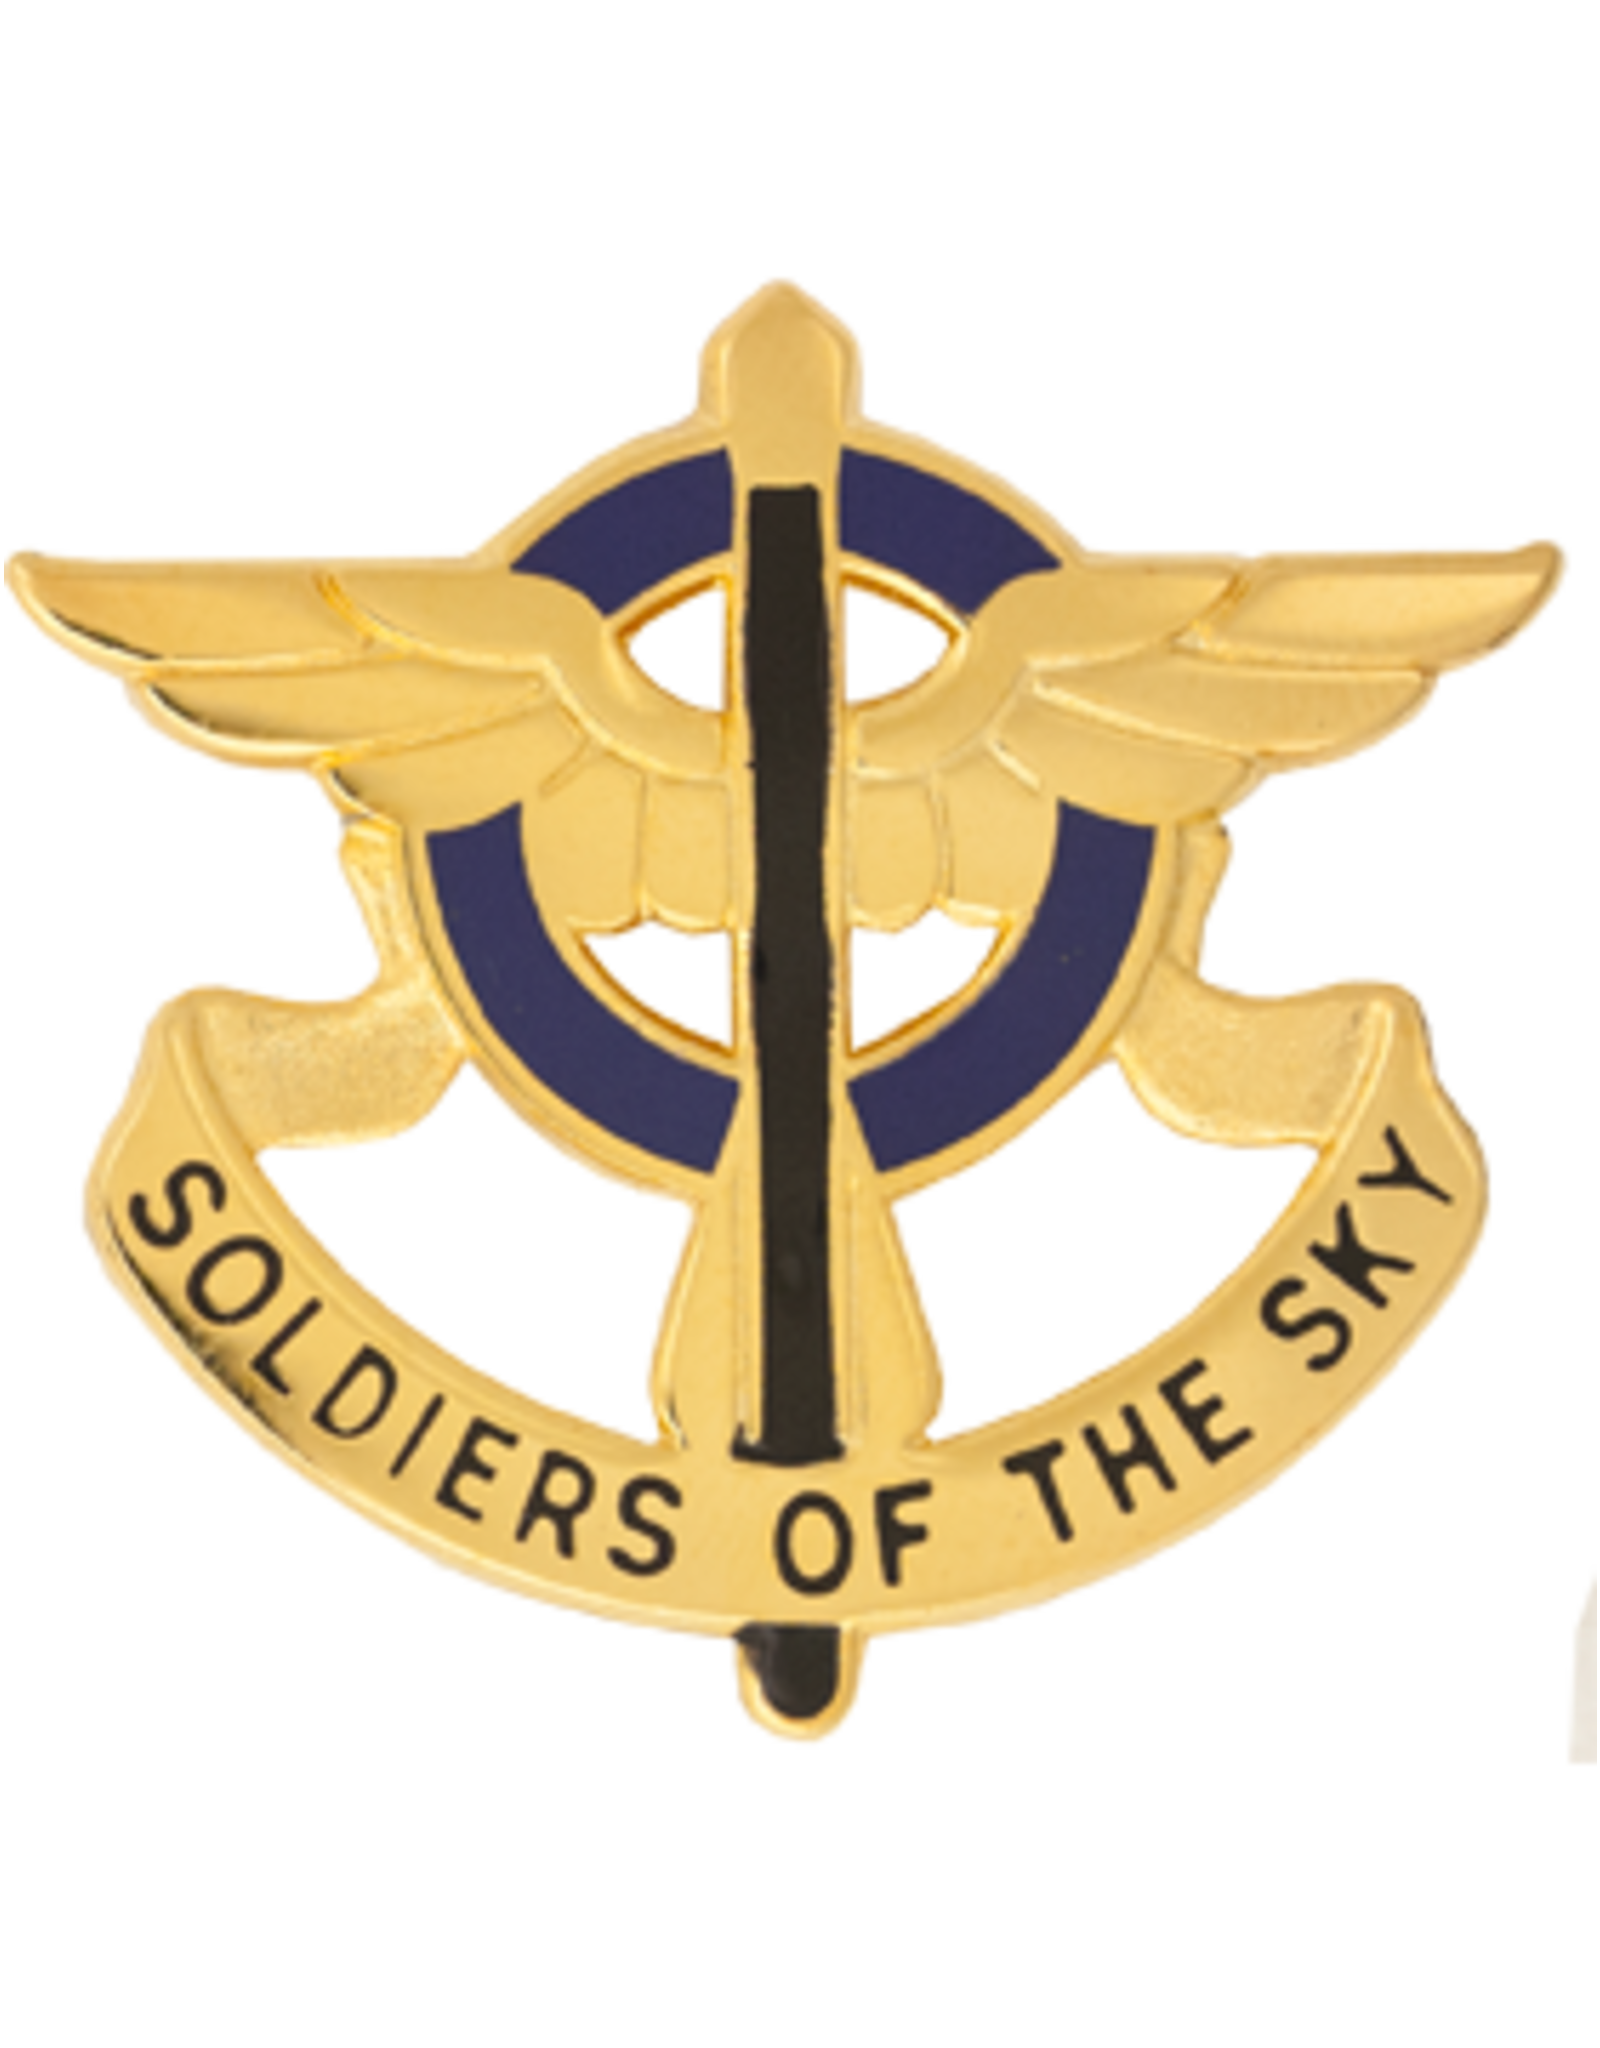 10th Aviation Unit Crest - Soldiers of the Sky